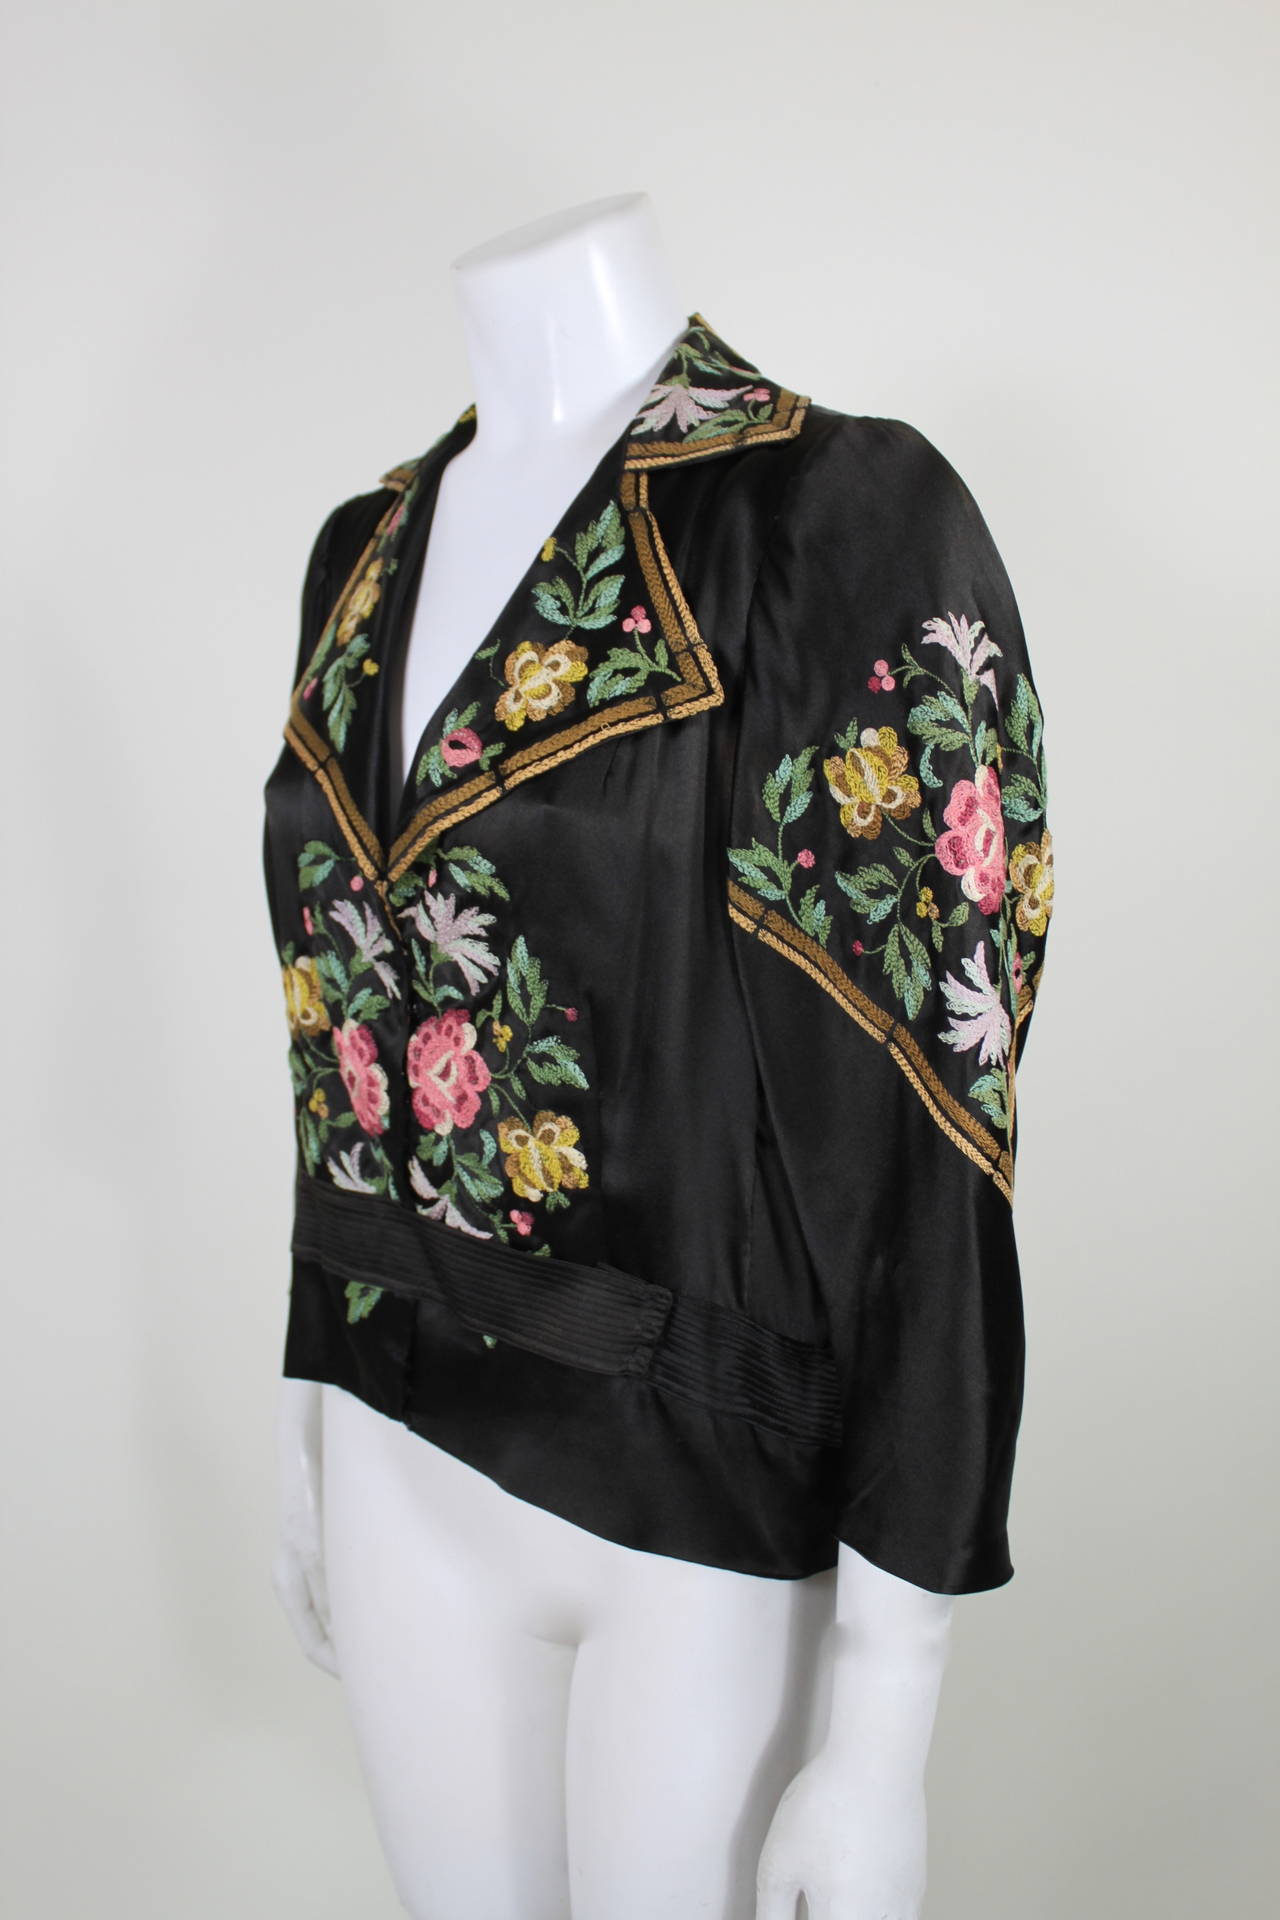 A gorgeous blouse from the 1920s. Done in a luxurious black silk, the blouse has beautiful, colorful floral embroidery throughout. Construction of the blouse includes weights throughout to maintain shape and fit.

-Unlined
-Slight fade under